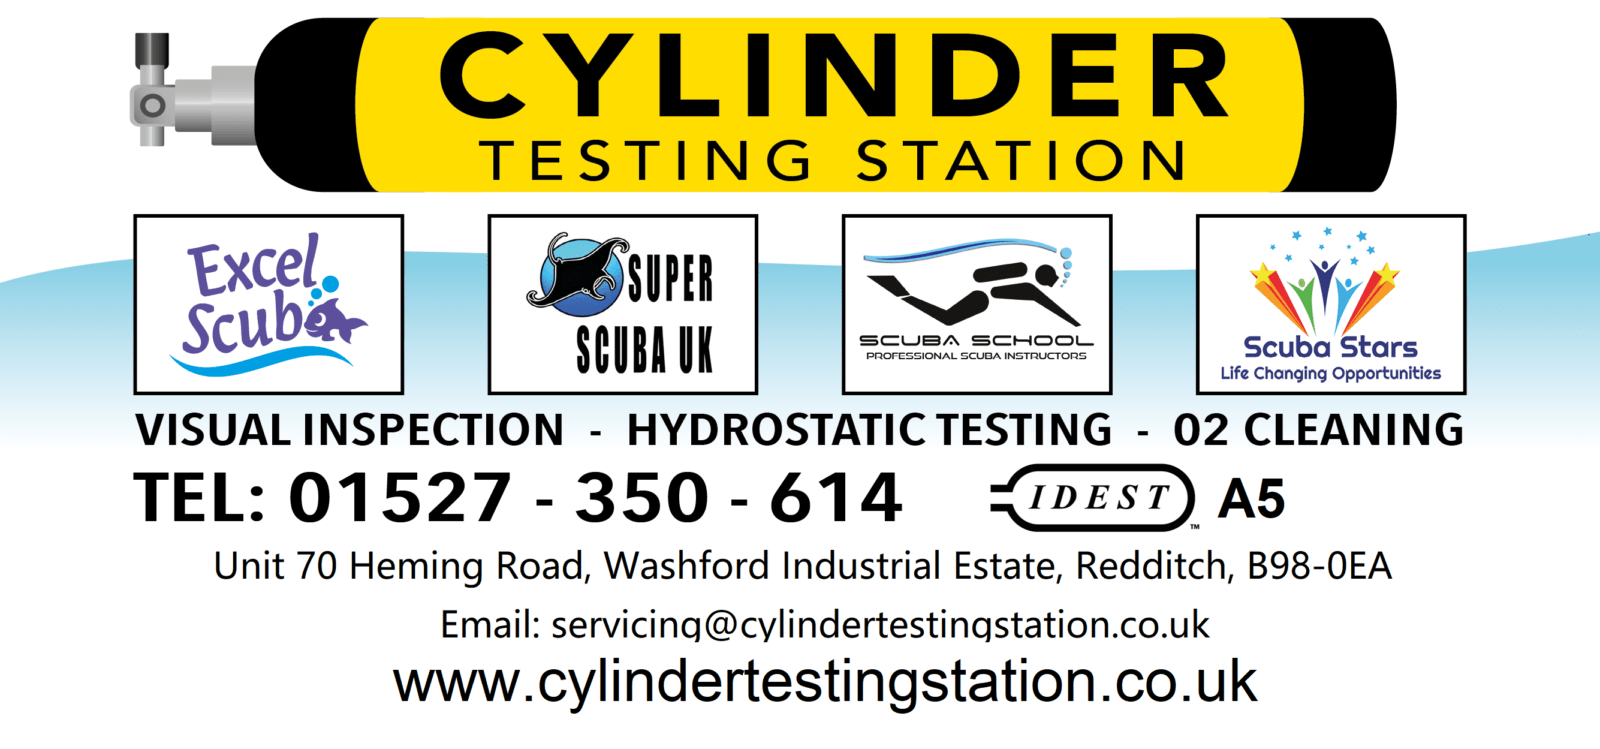 Cylinder Testing Station with Address